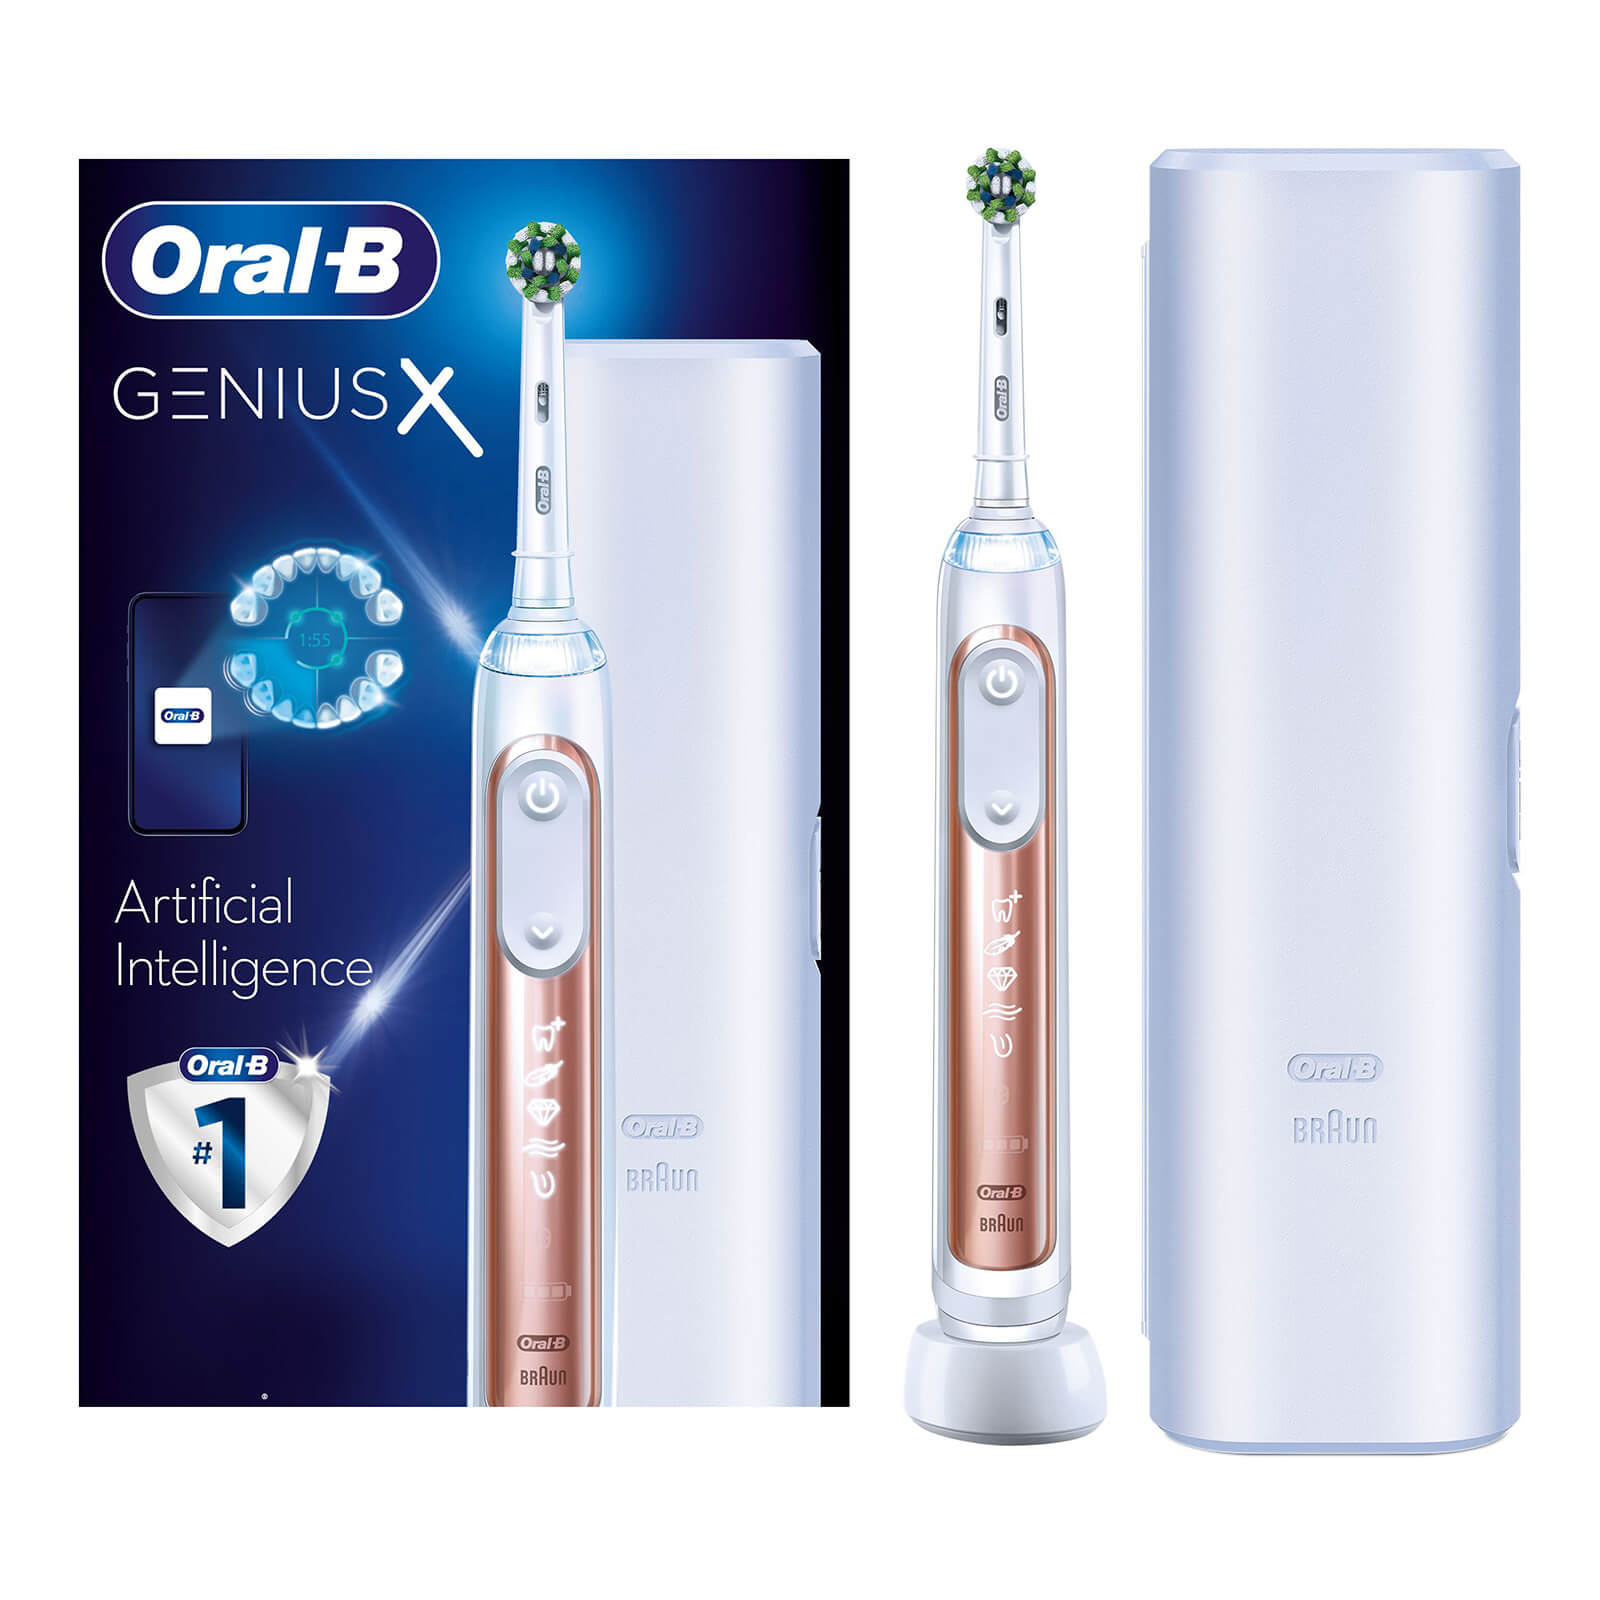 Oral B Genius X Rose Gold Electric Toothbrush with Travel Case - Toothbrush